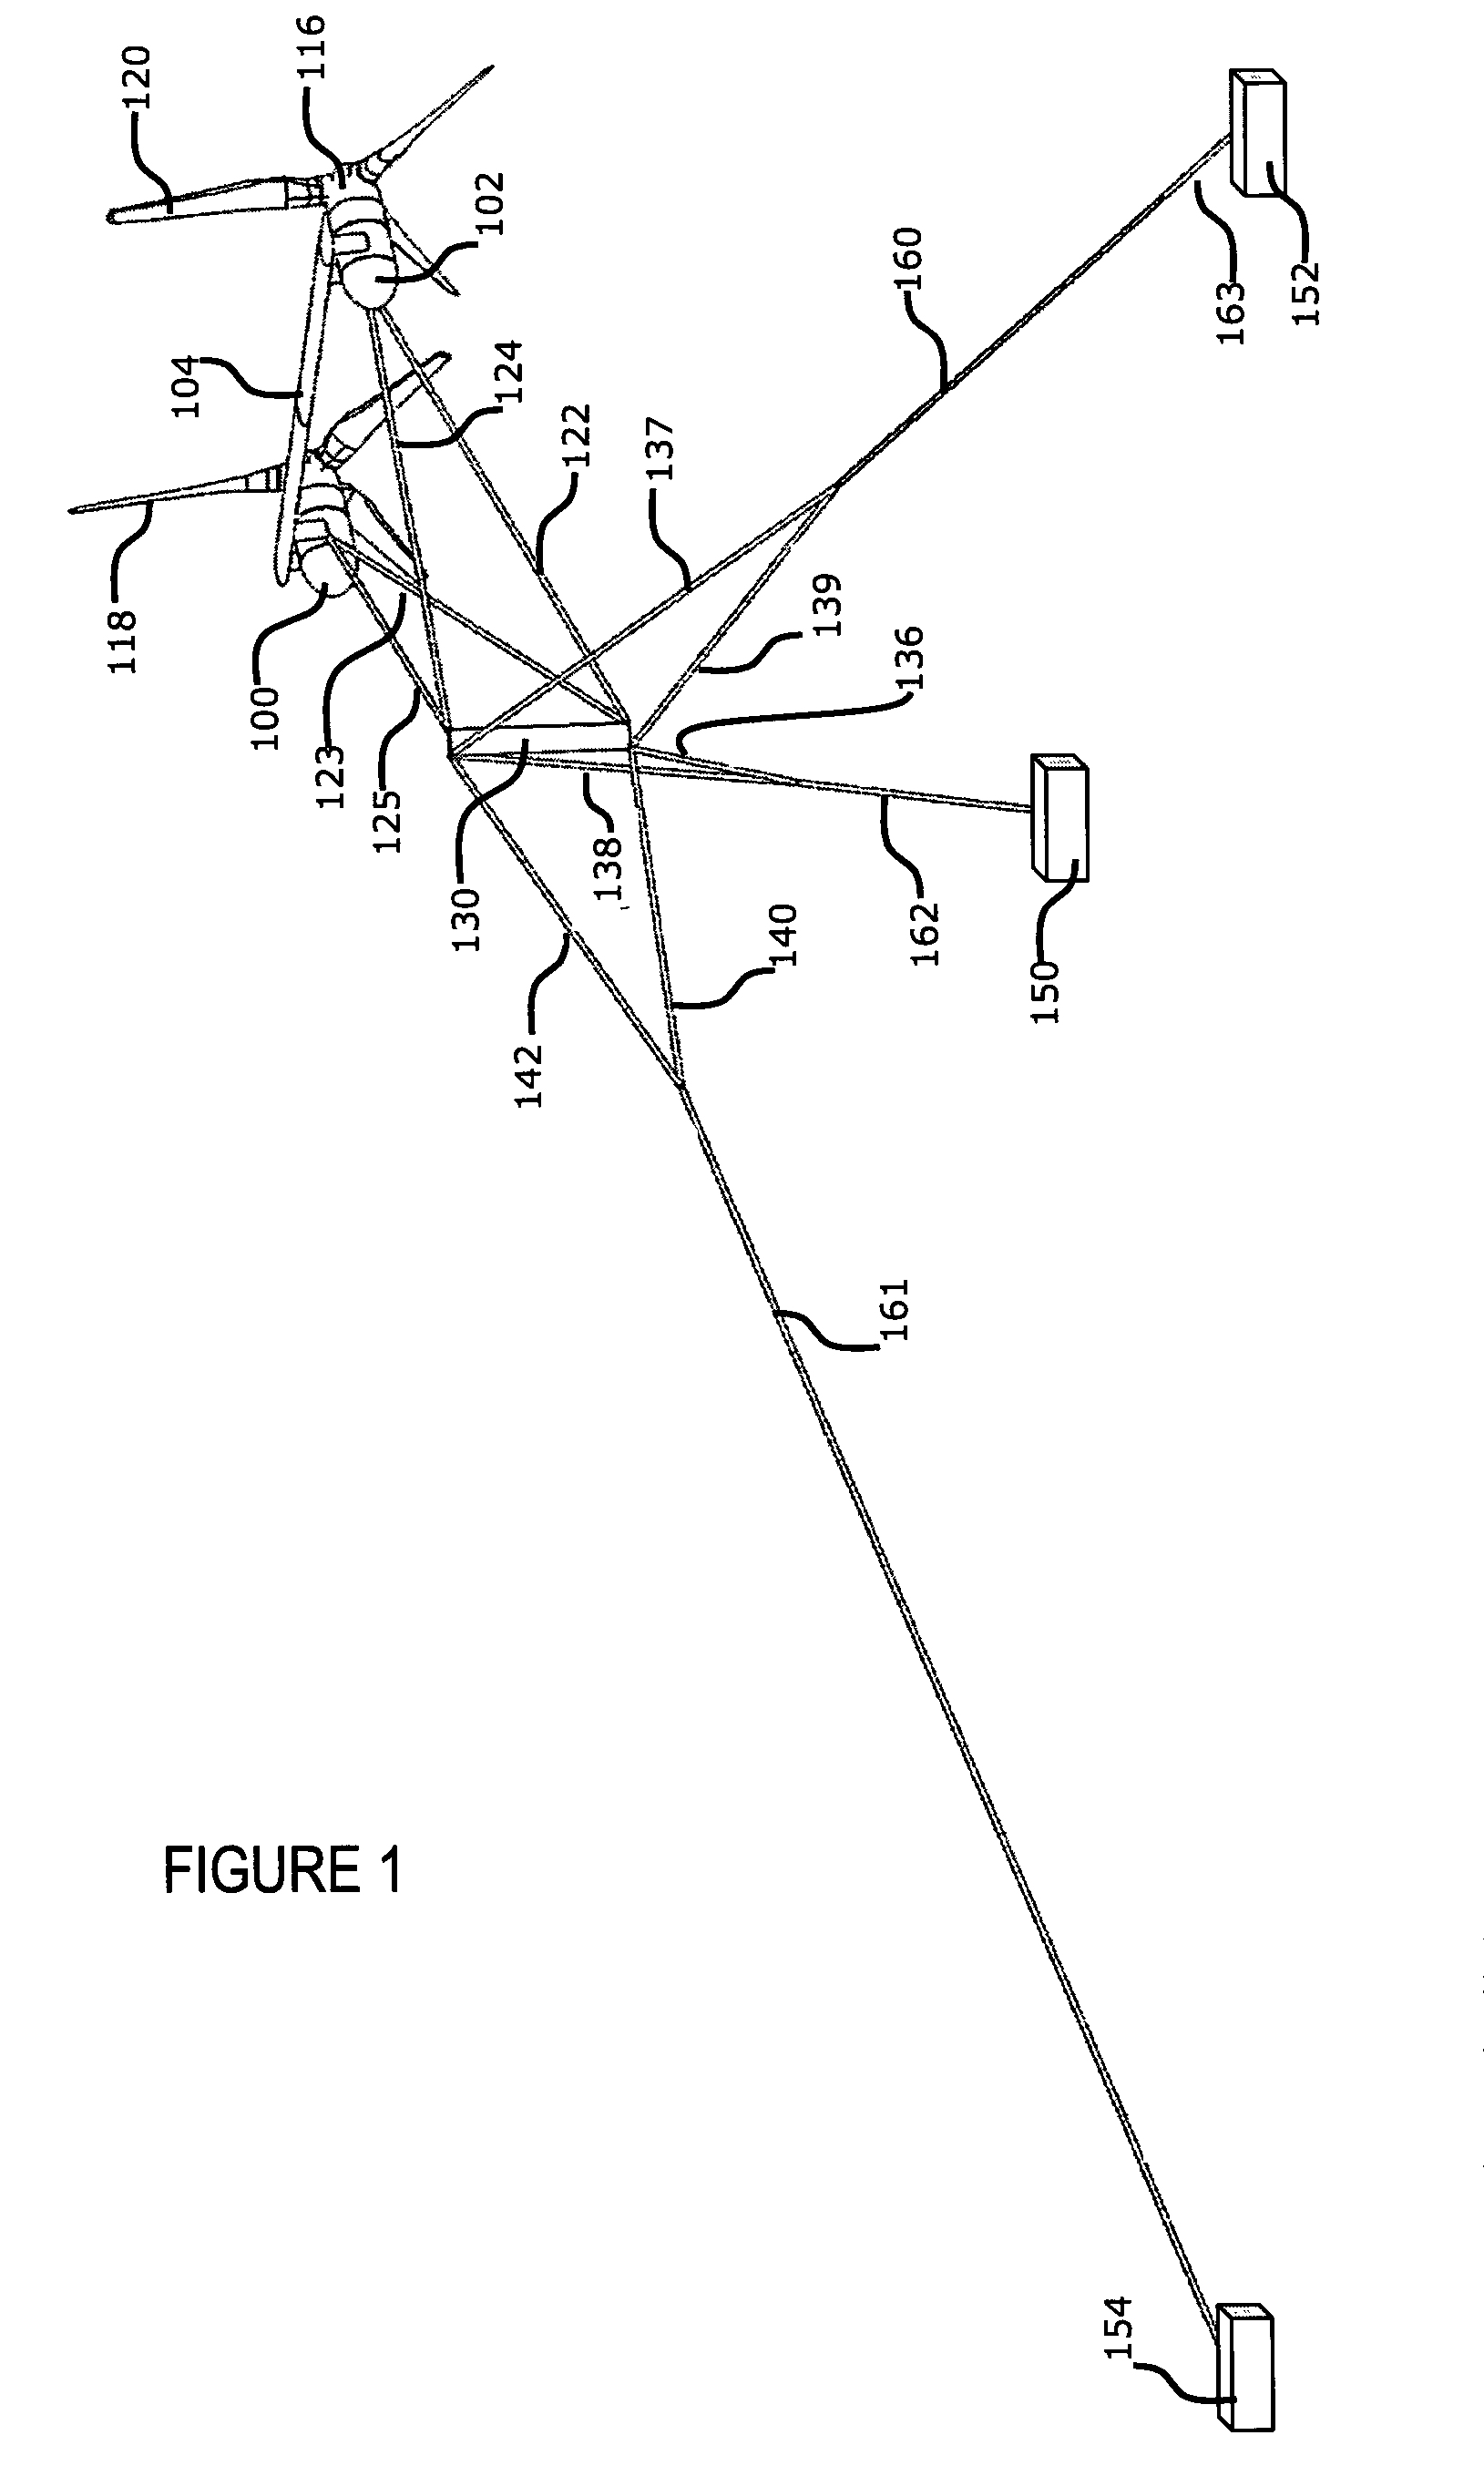 Multi-point tethering and stability system and control method for underwater current turbine